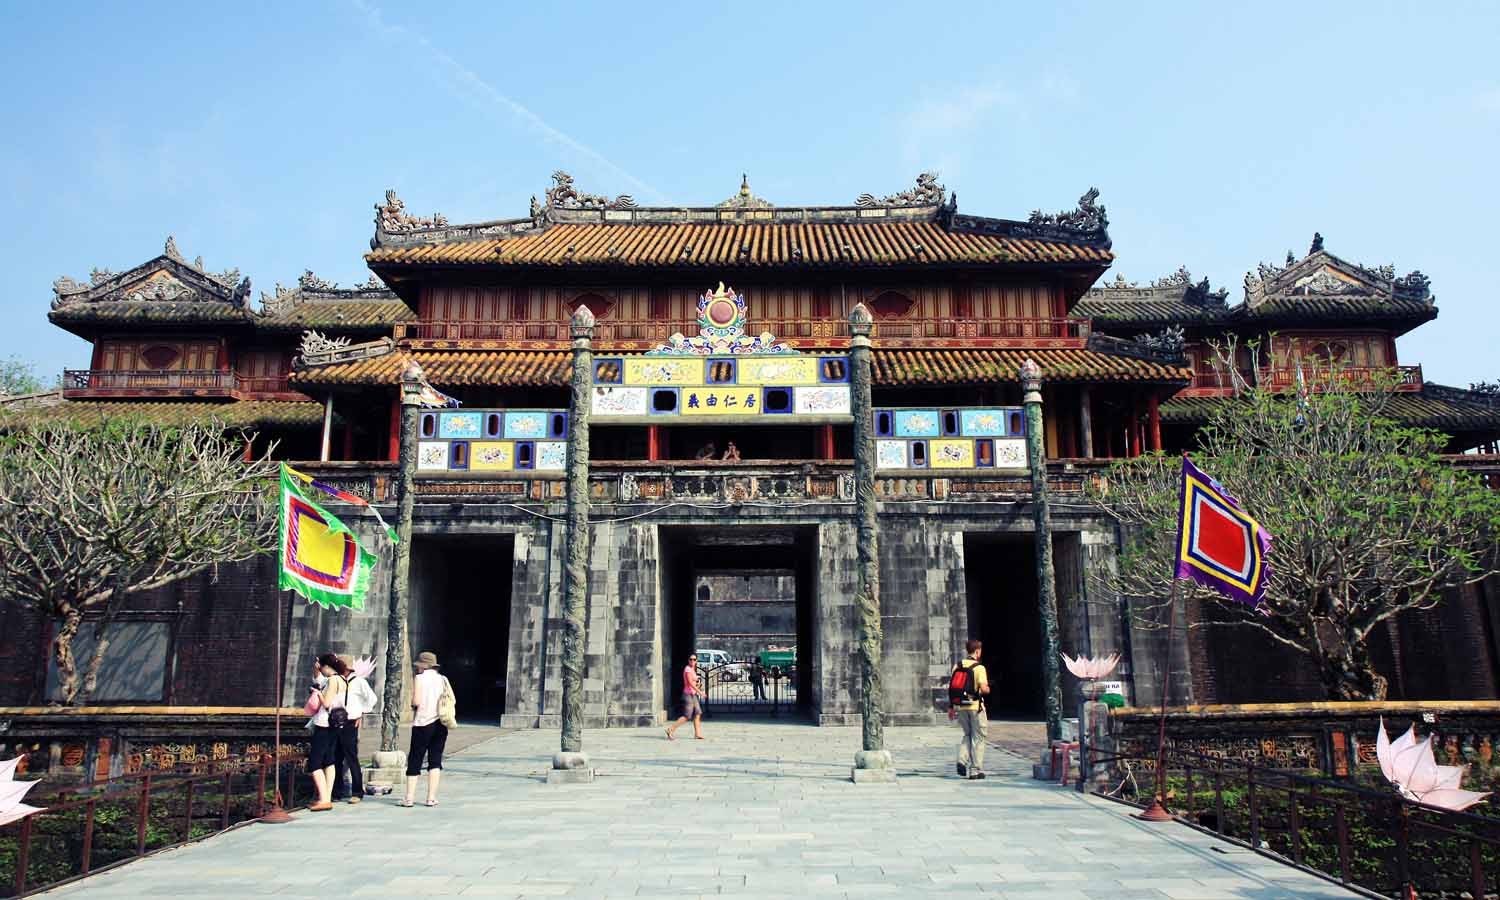 Looking for a unique adventure, Take a trip back in time and explore the ancient capital of Hue